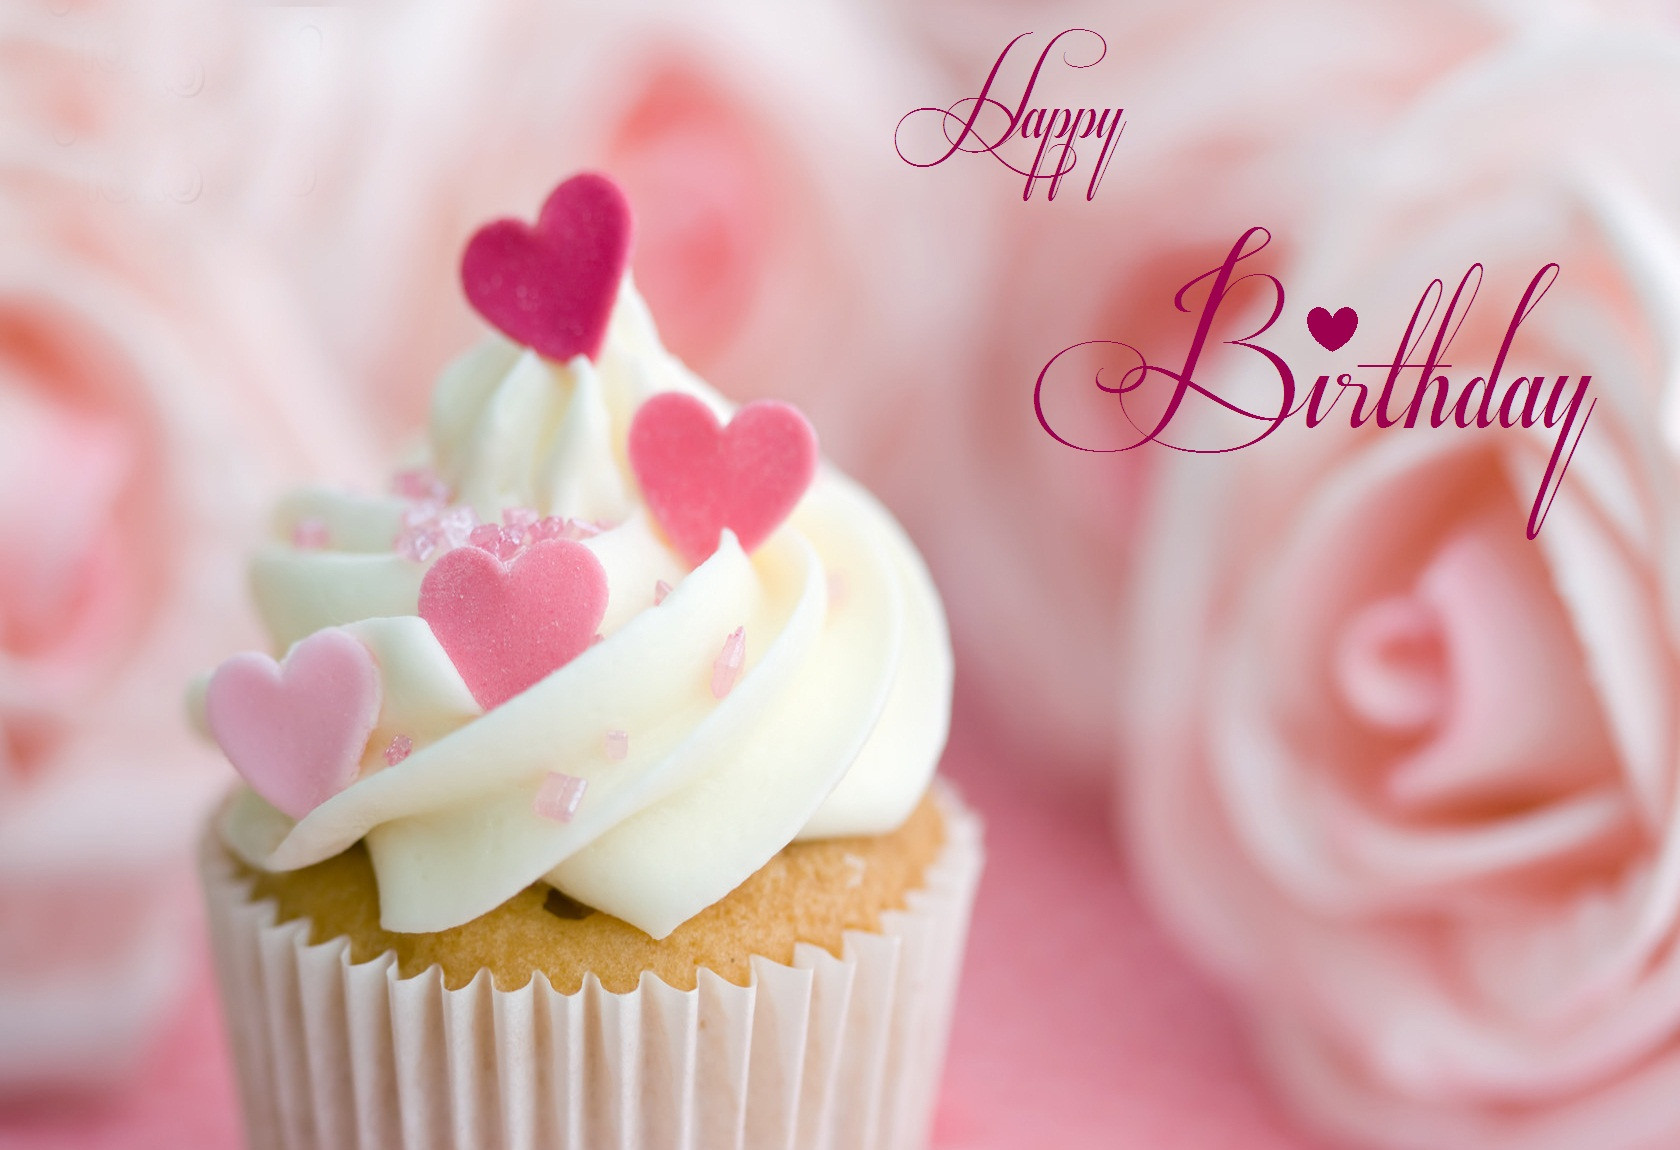 Meaningful Birthday Quotes
 Lovely and Meaningful Birthday Quotes for Your Beloved